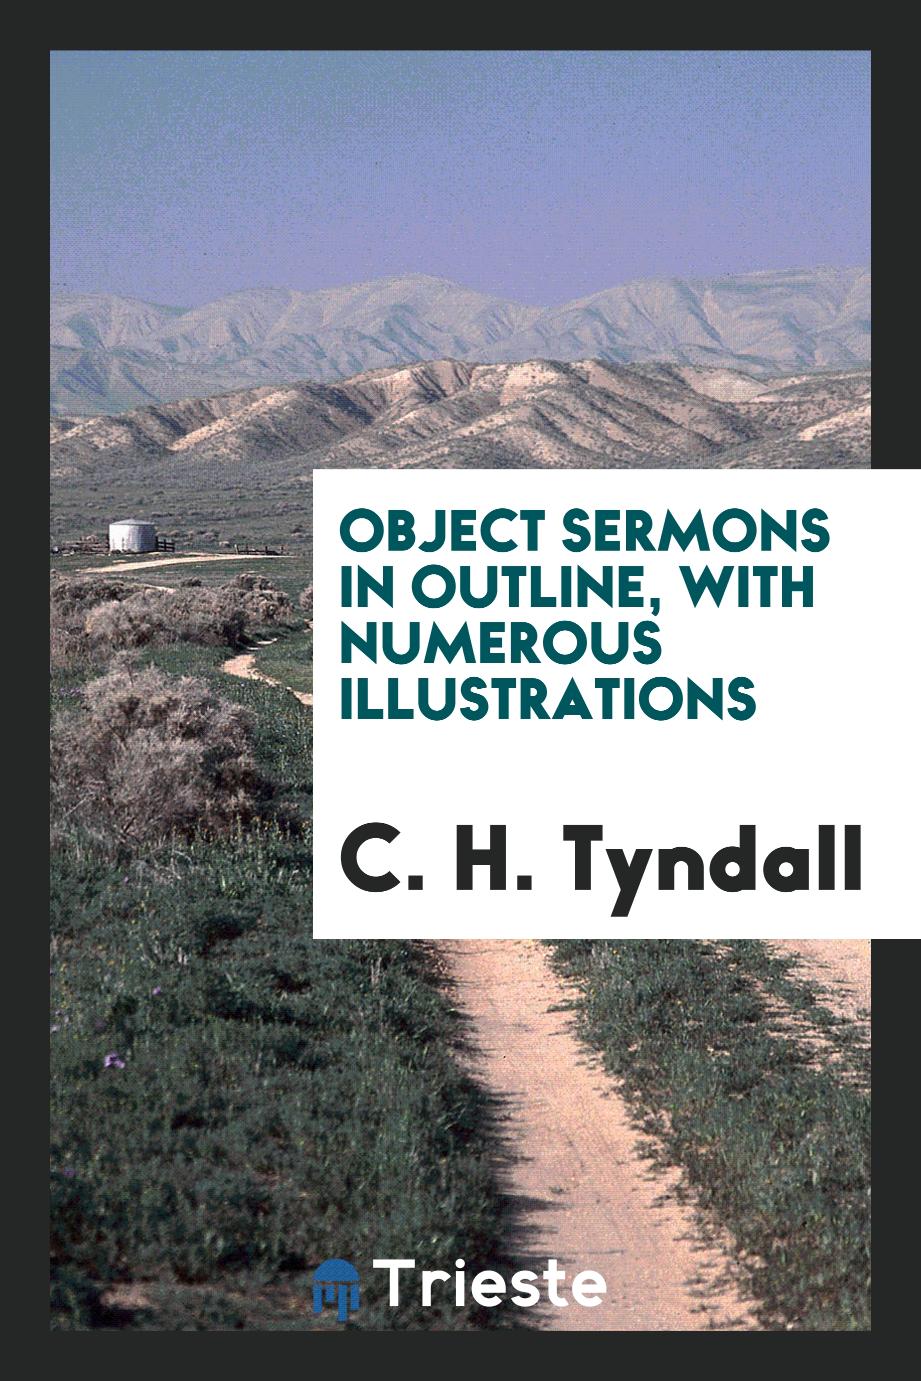 Object sermons in outline, with numerous illustrations